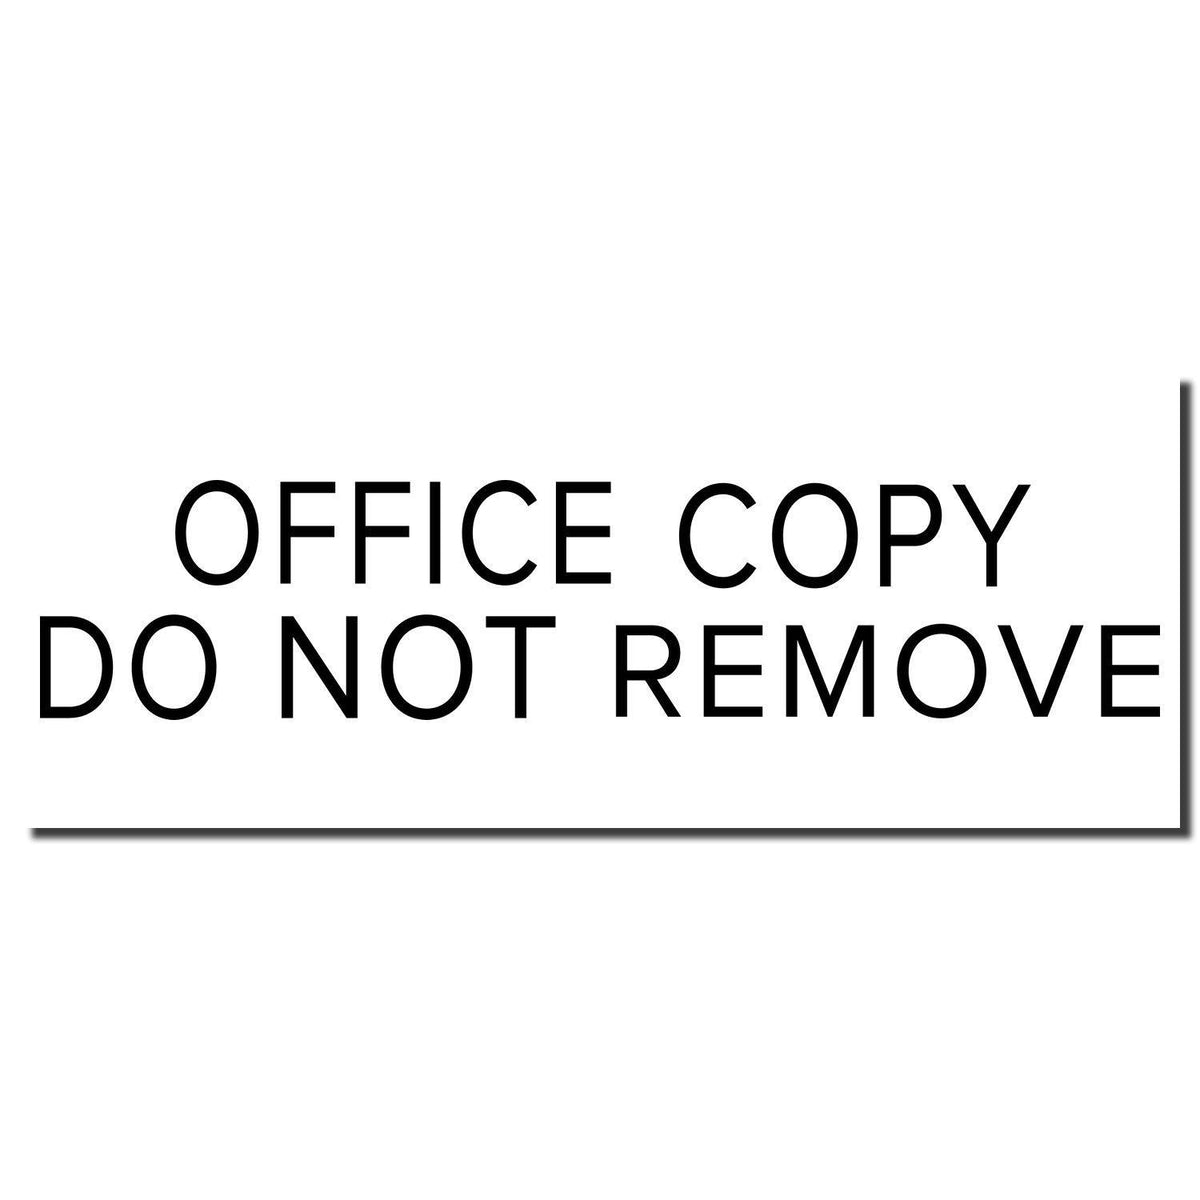 Narrow Font Office Copy Do Not Remove Rubber Stamp - Engineer Seal Stamps - Brand_Acorn, Impression Size_Small, Stamp Type_Regular Stamp, Type of Use_Office